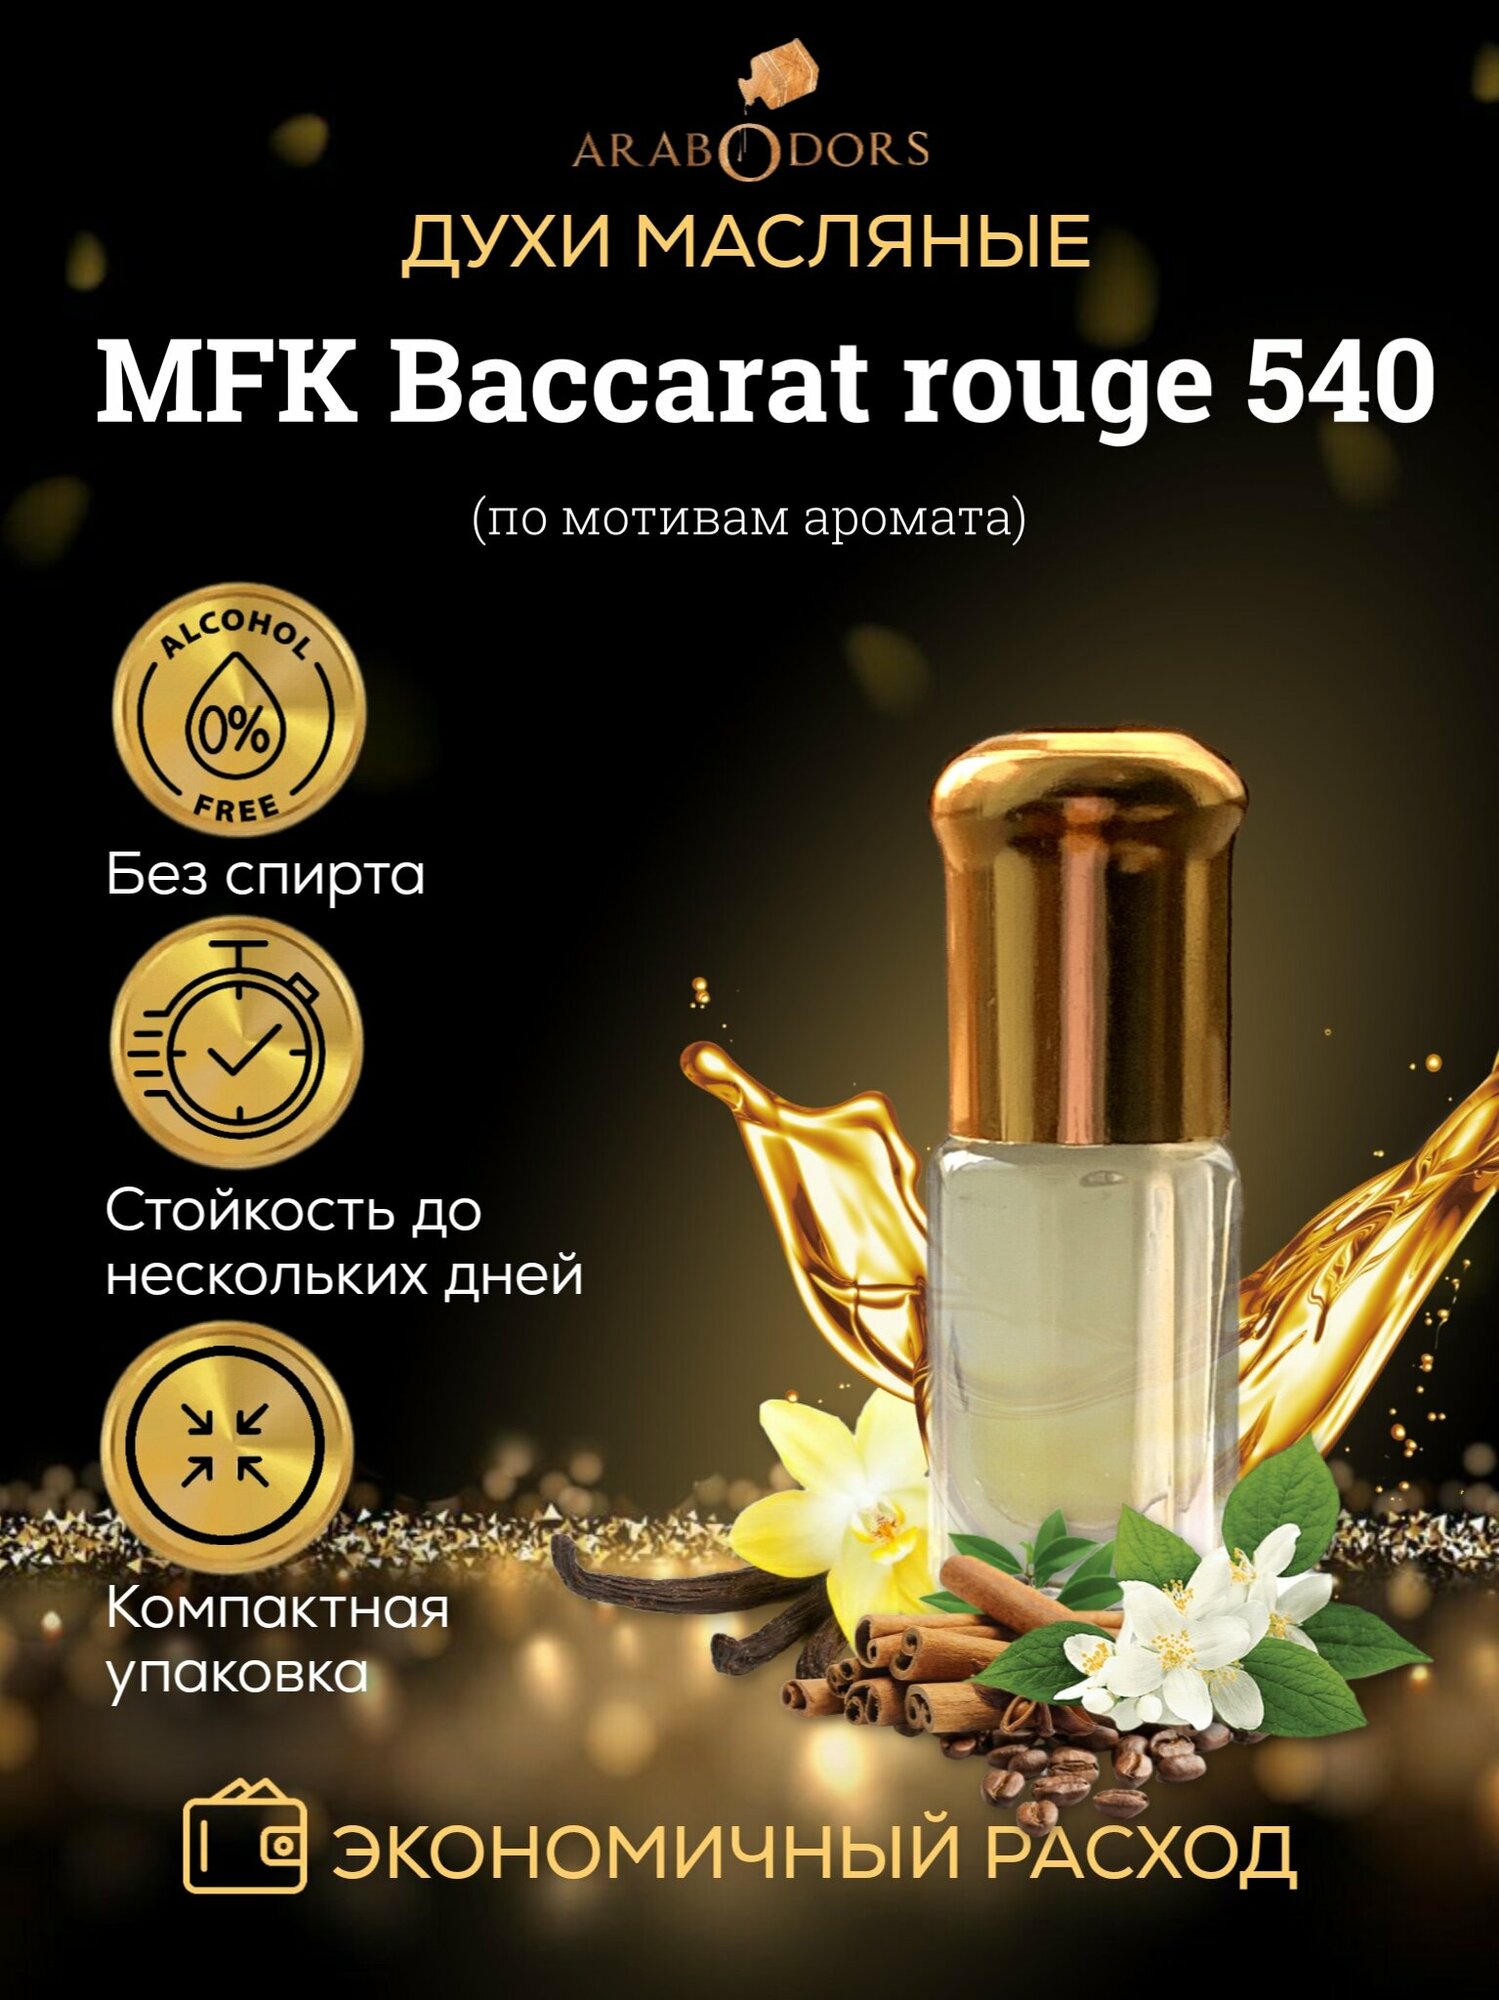 Baccarat rouge 540 (мотив) масляные духи